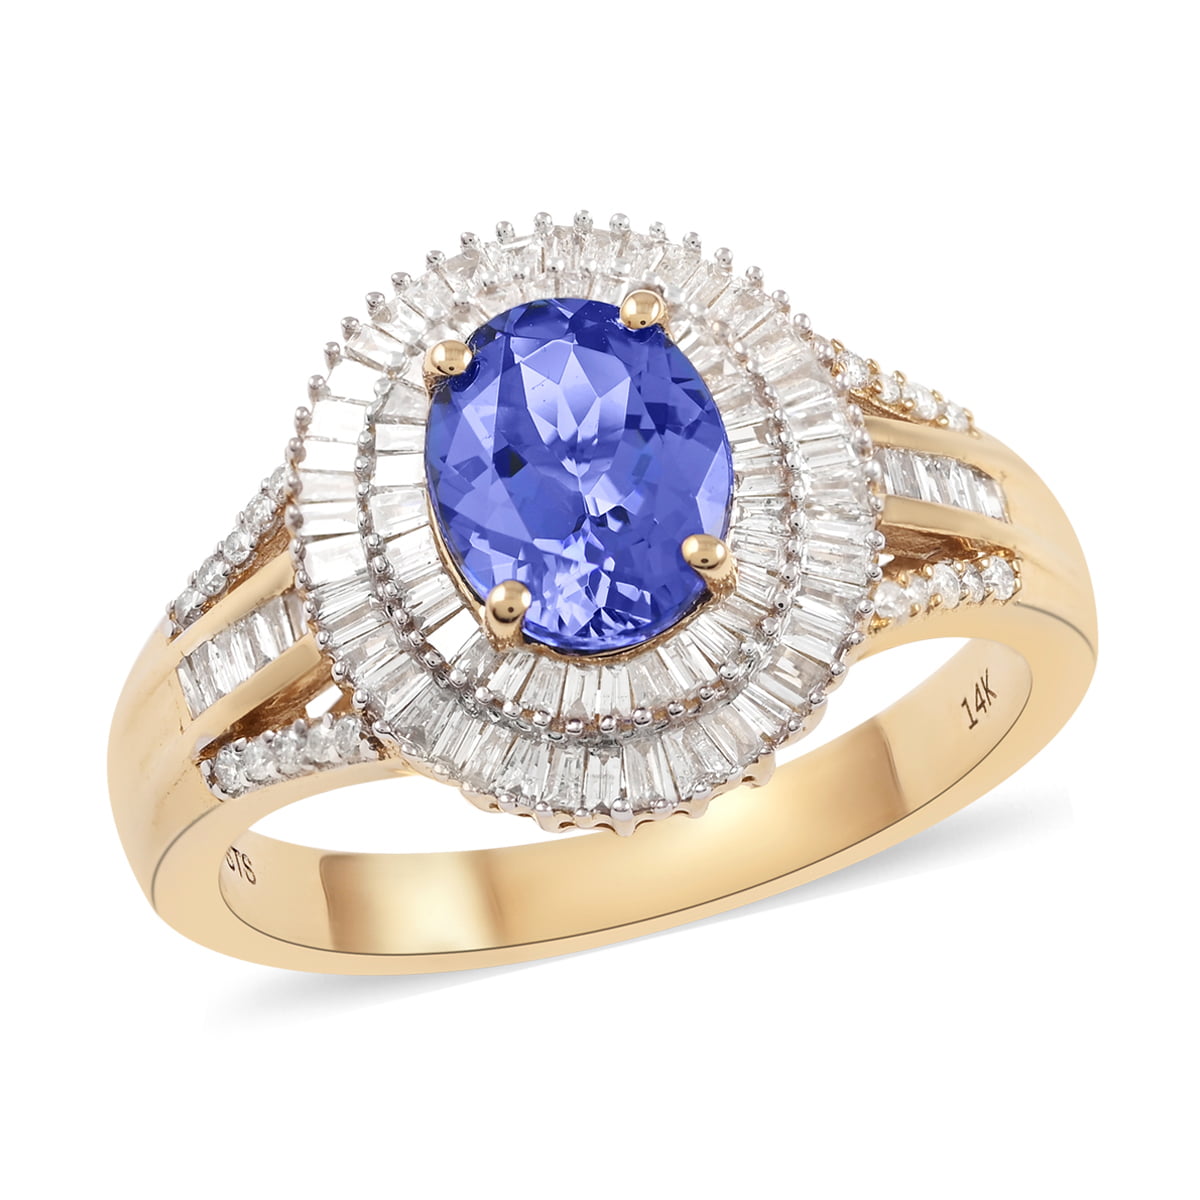 10K Yellow Gold Blue Tanzanite White Diamond Ring Gift Ct 1.3 H Color I3 Clarity 